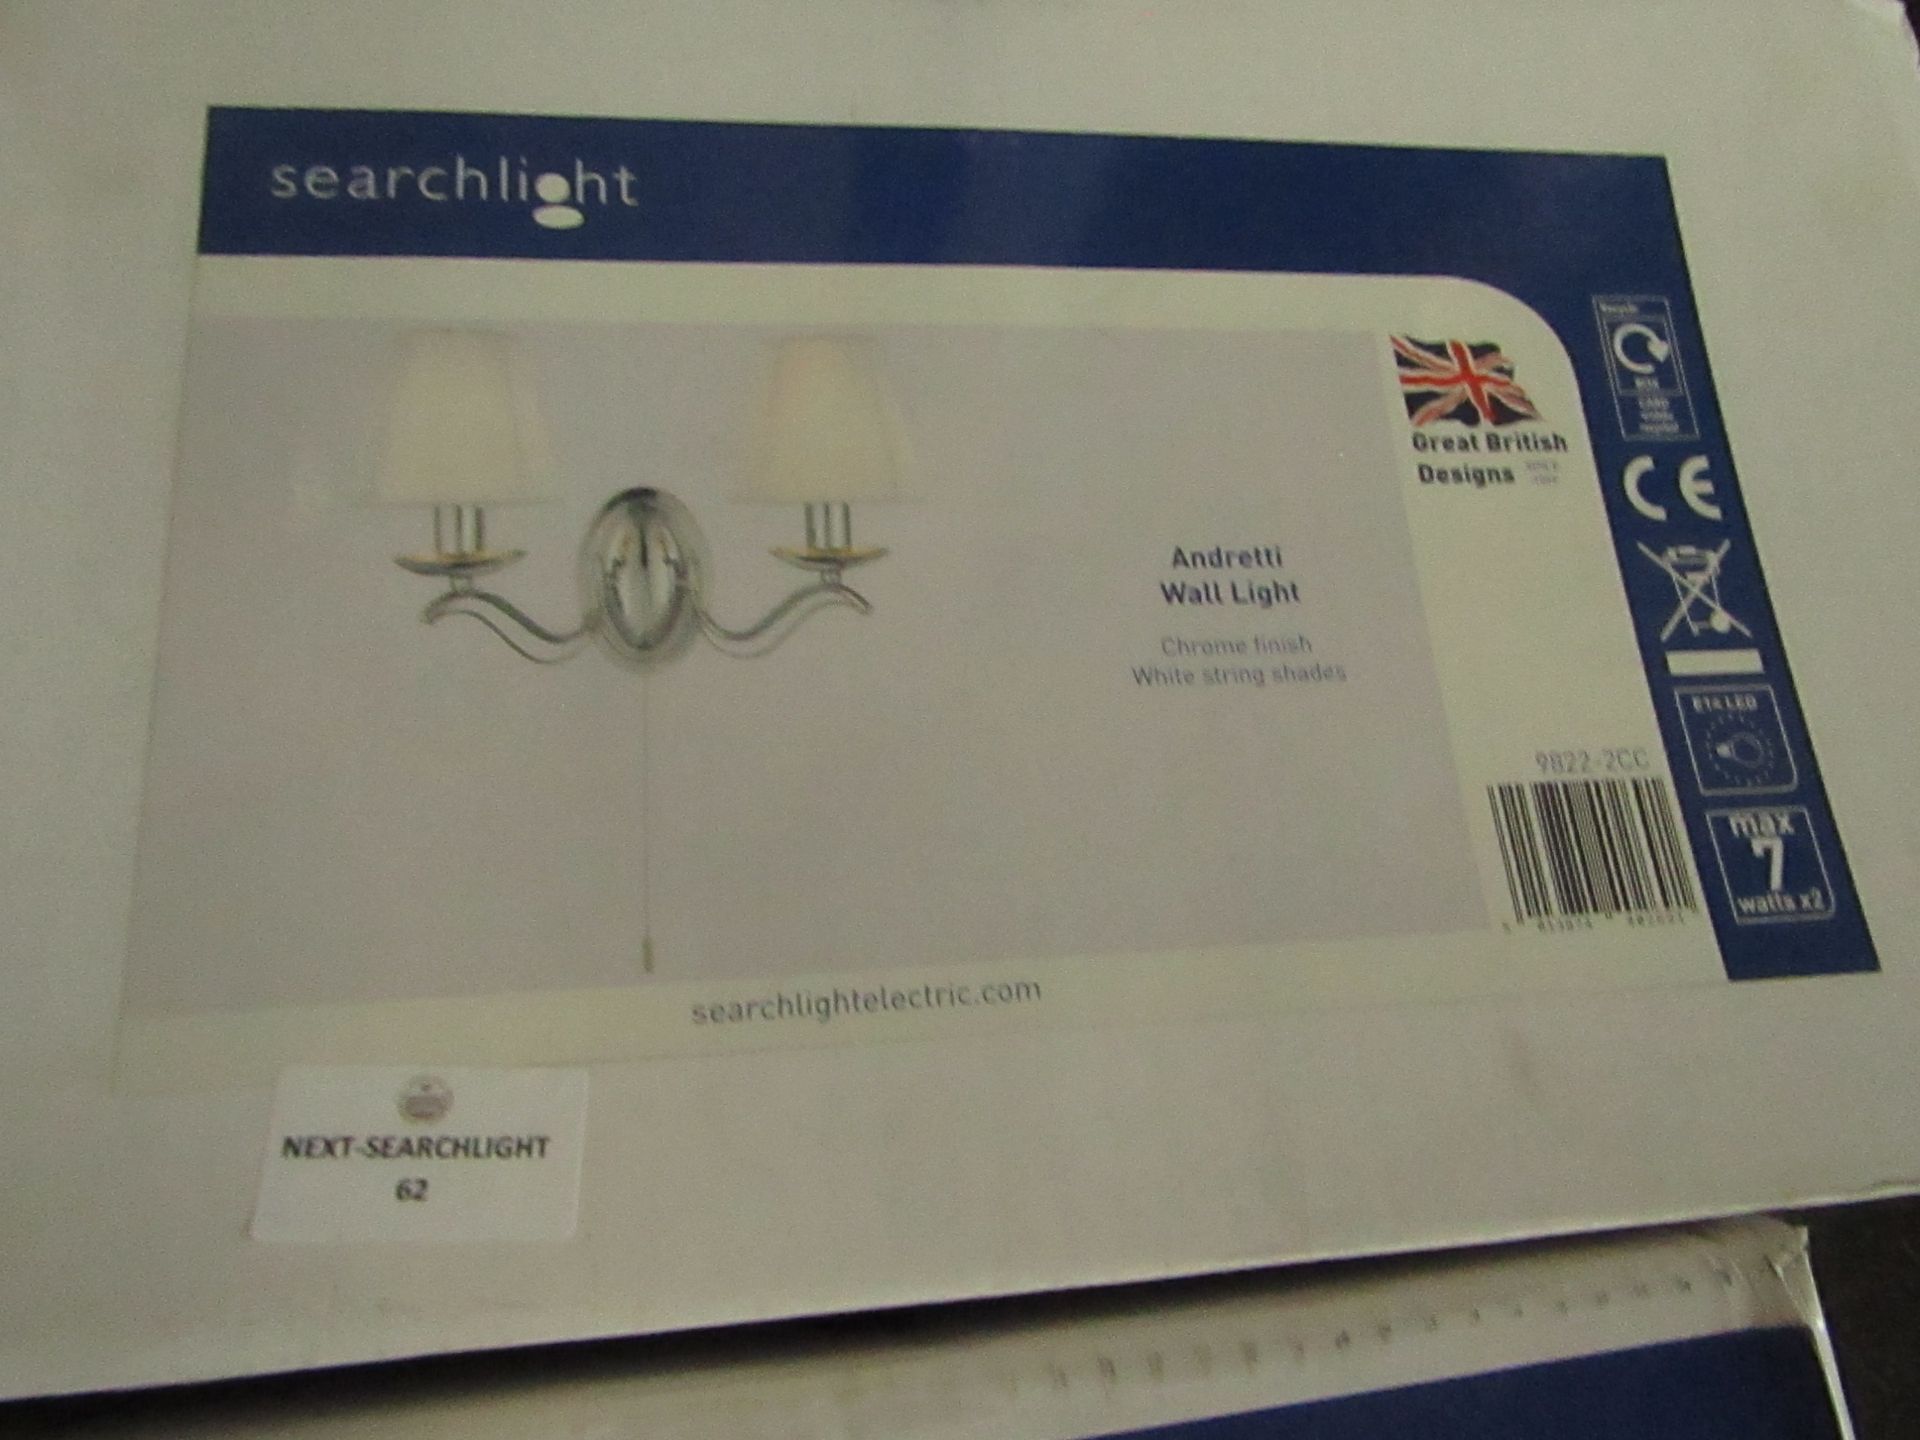 Searchlight Andretti - 2lt Wall Bracket Chrome White String Shades RRP “?40.00 - This lot contains - Image 2 of 2